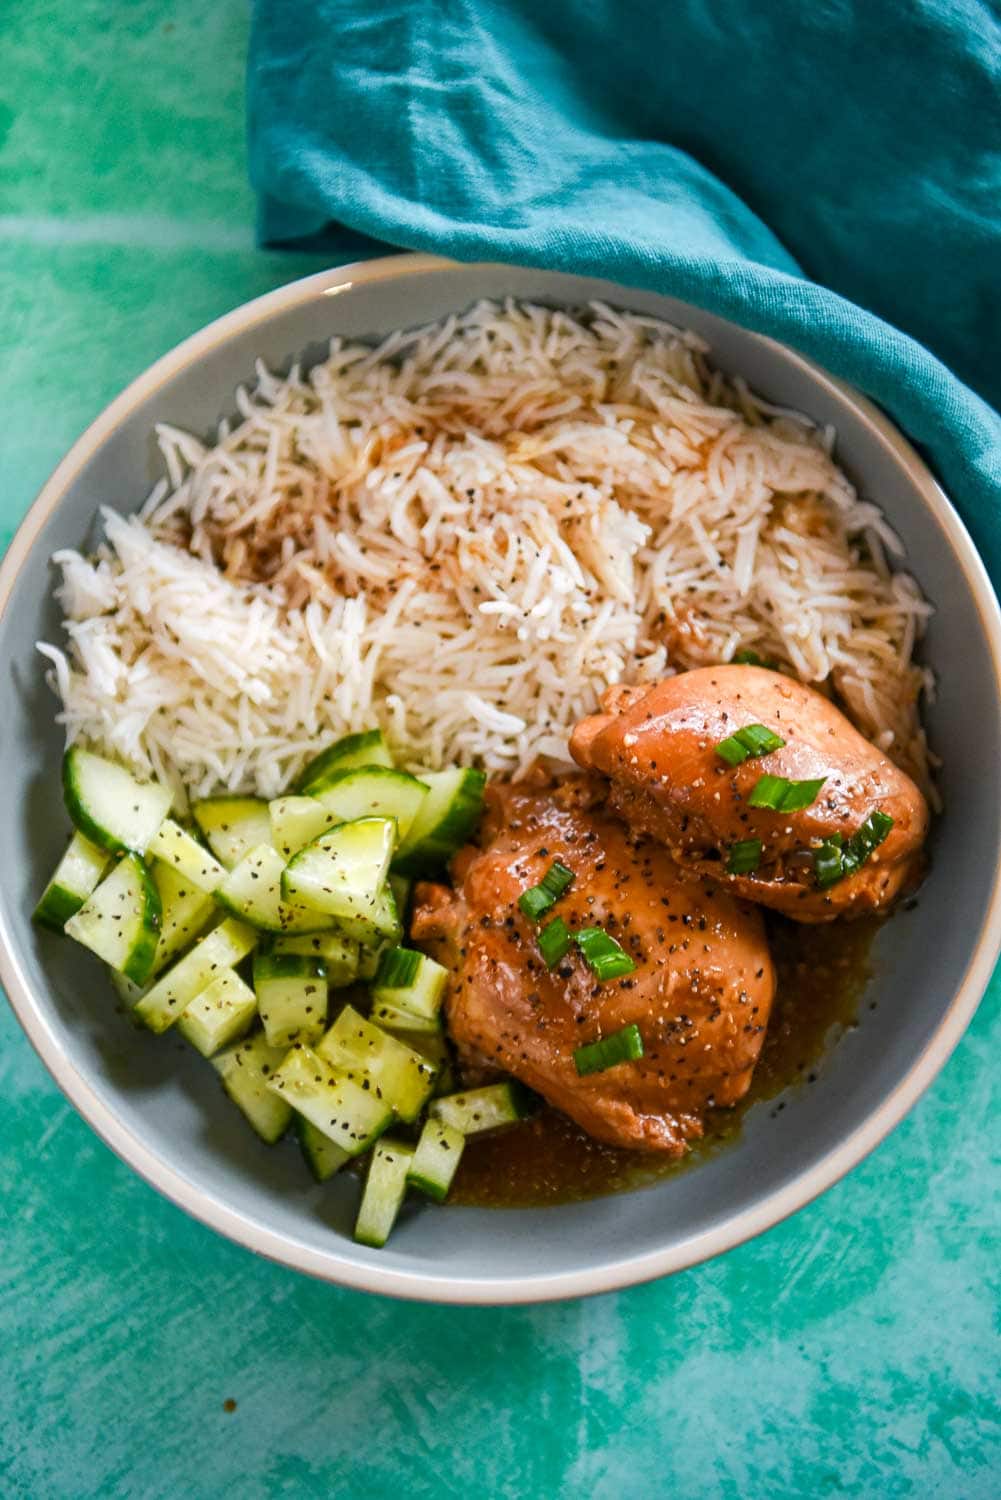 Bowls of adobo chicken, rice and marinated cucumbers